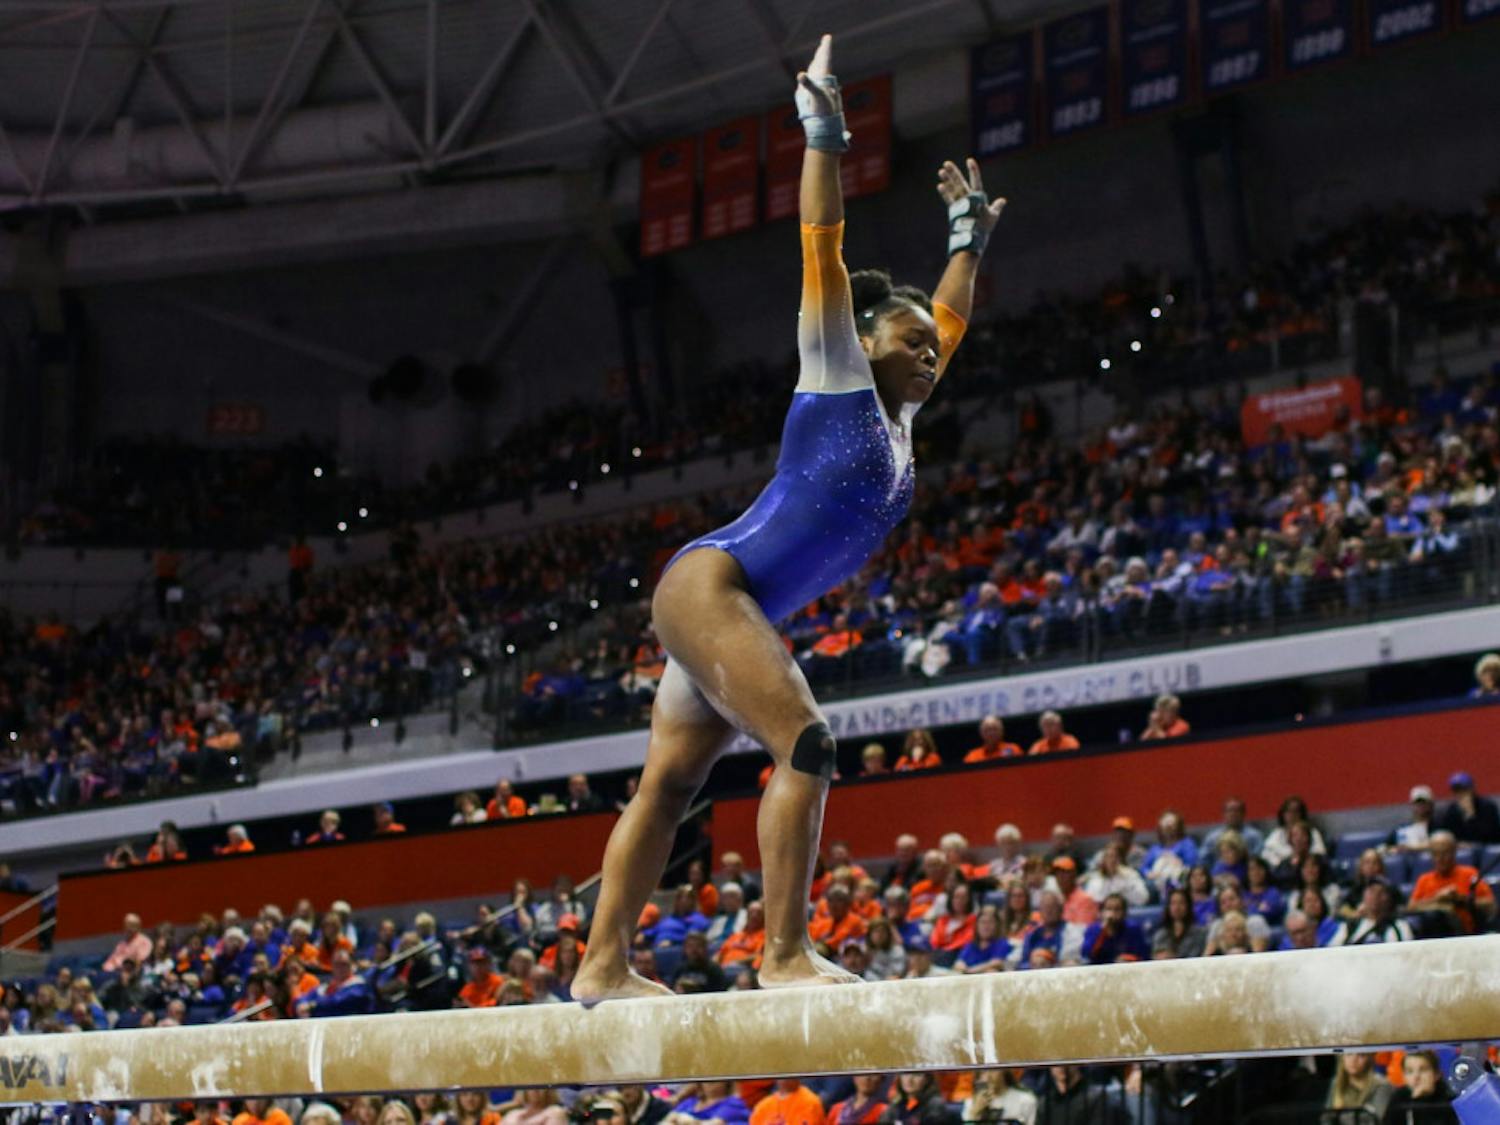 Senior gymnast Alicia Boren has competed in three "Link to Pink" meets during her time at UF. "Take a chance and enjoy competing for someone else...take a second to go speak to them and thank them," she said.